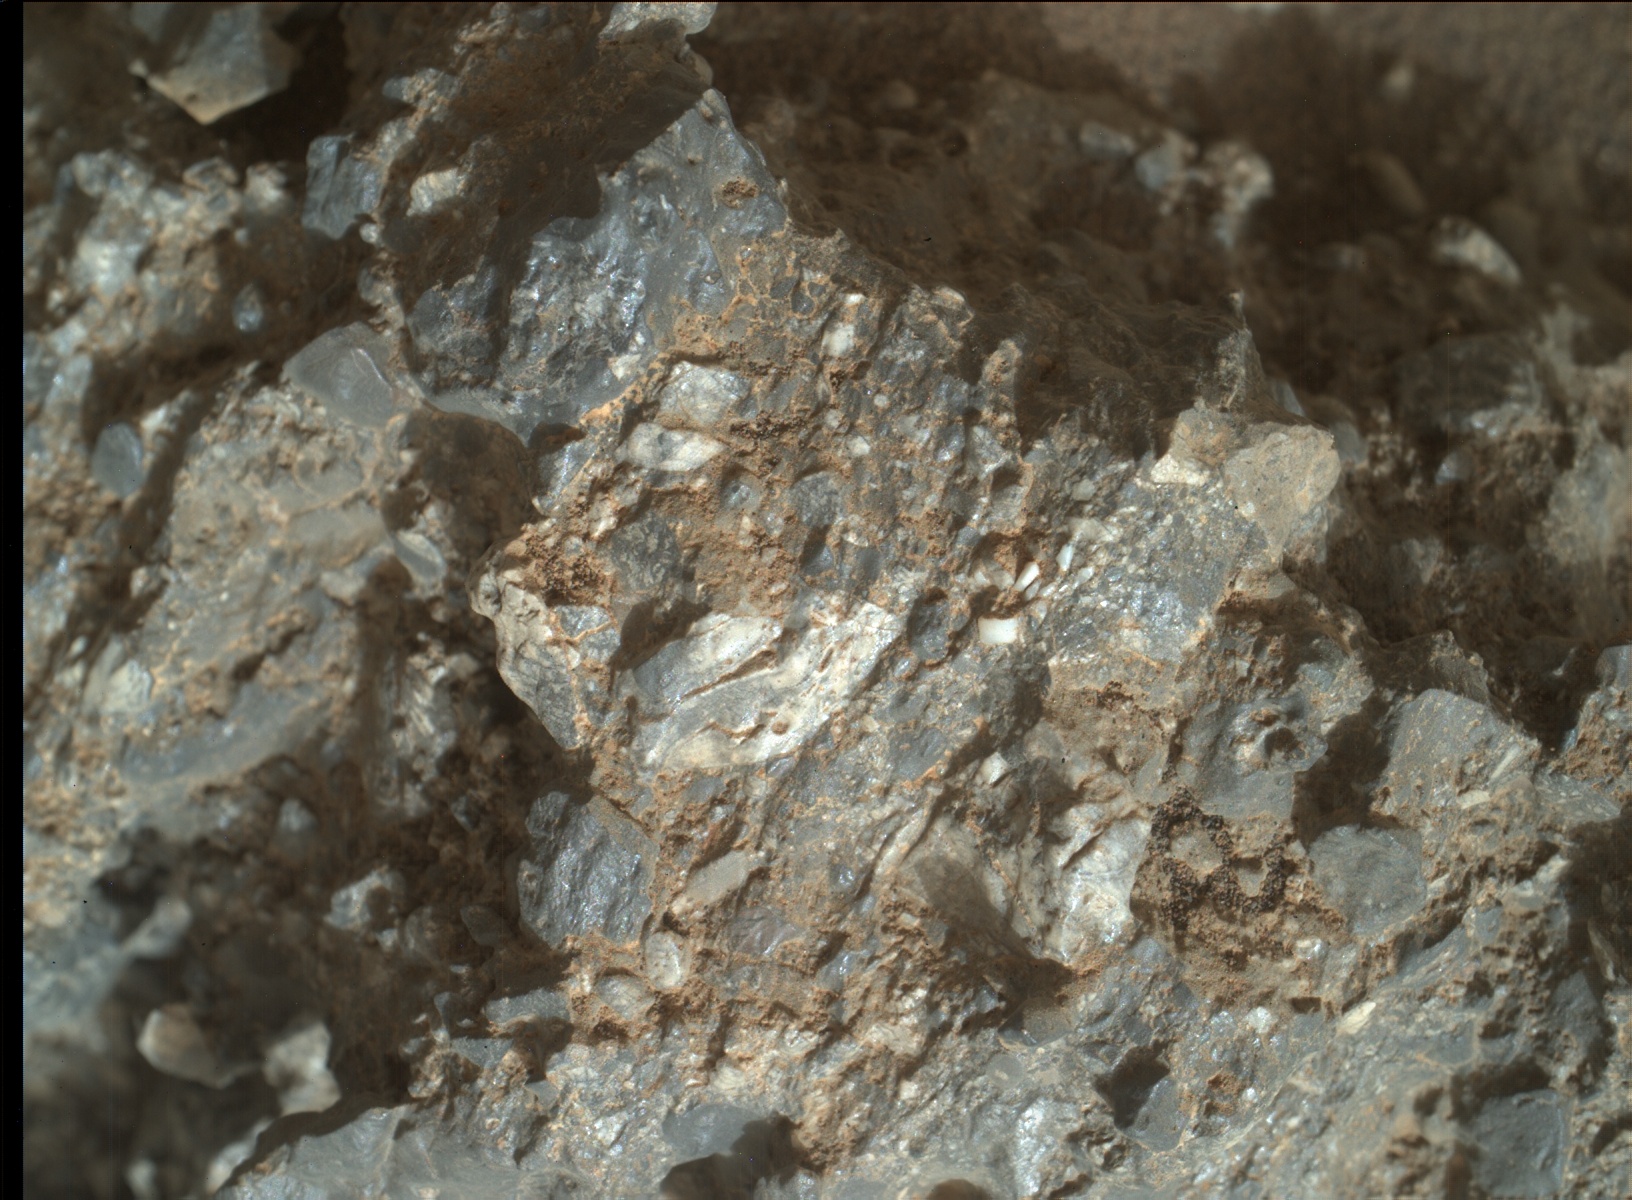 Nasa's Mars rover Curiosity acquired this image using its Mars Hand Lens Imager (MAHLI) on Sol 2018